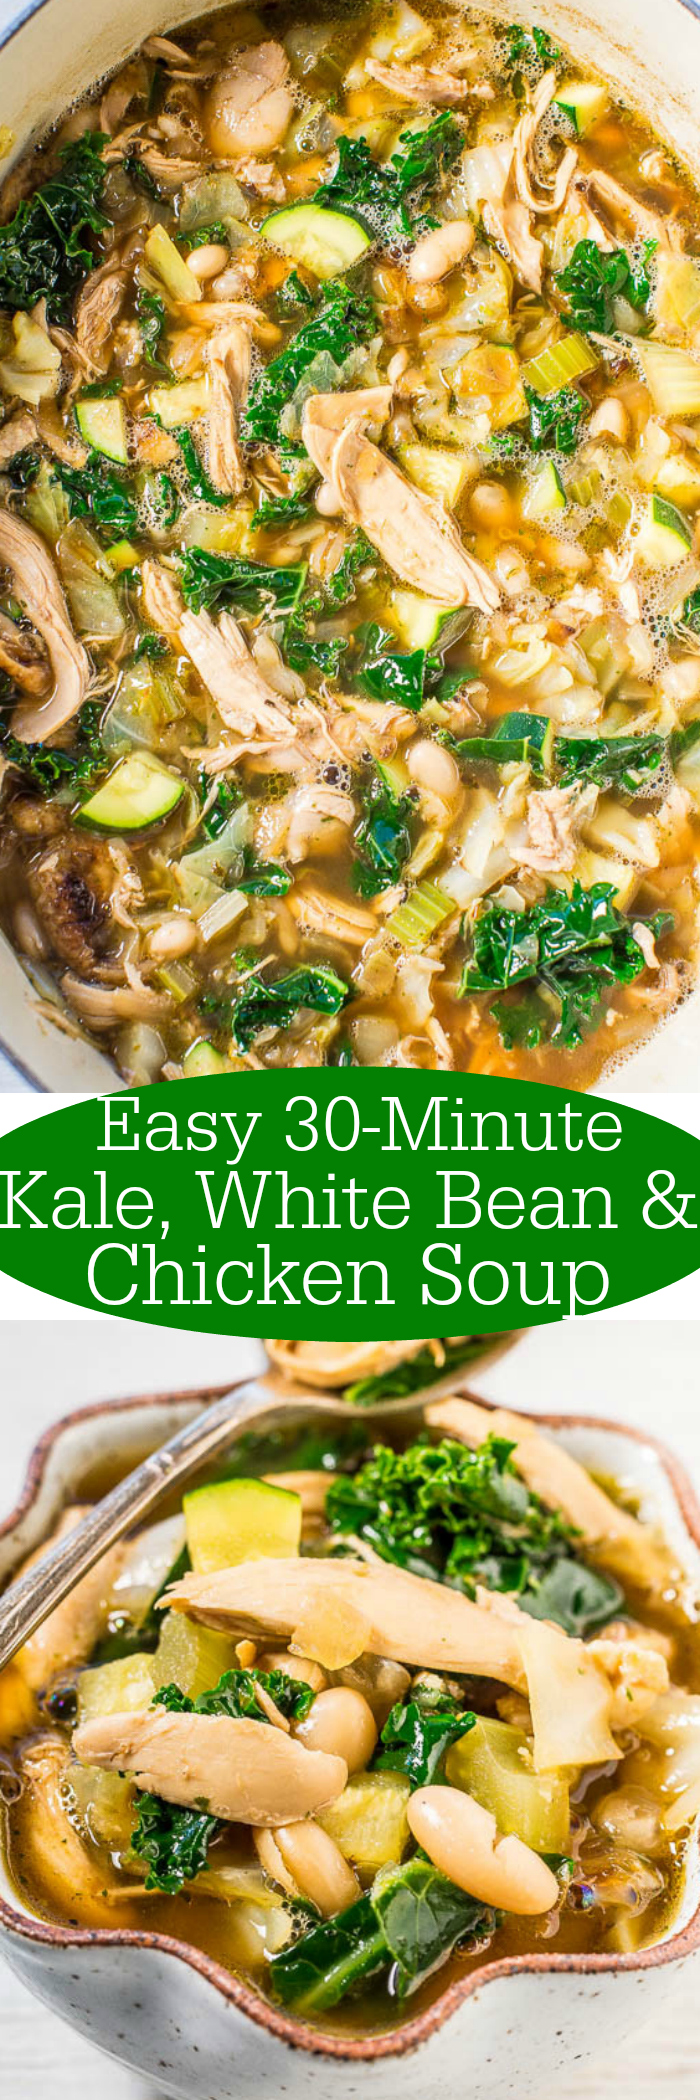 Easy 30-Minute Kale, White Bean, and Chicken Soup - Loaded with juicy chicken, healthy kale, and tender beans! Easy, hearty, and satisfying! Love it when something healthy tastes so good!!